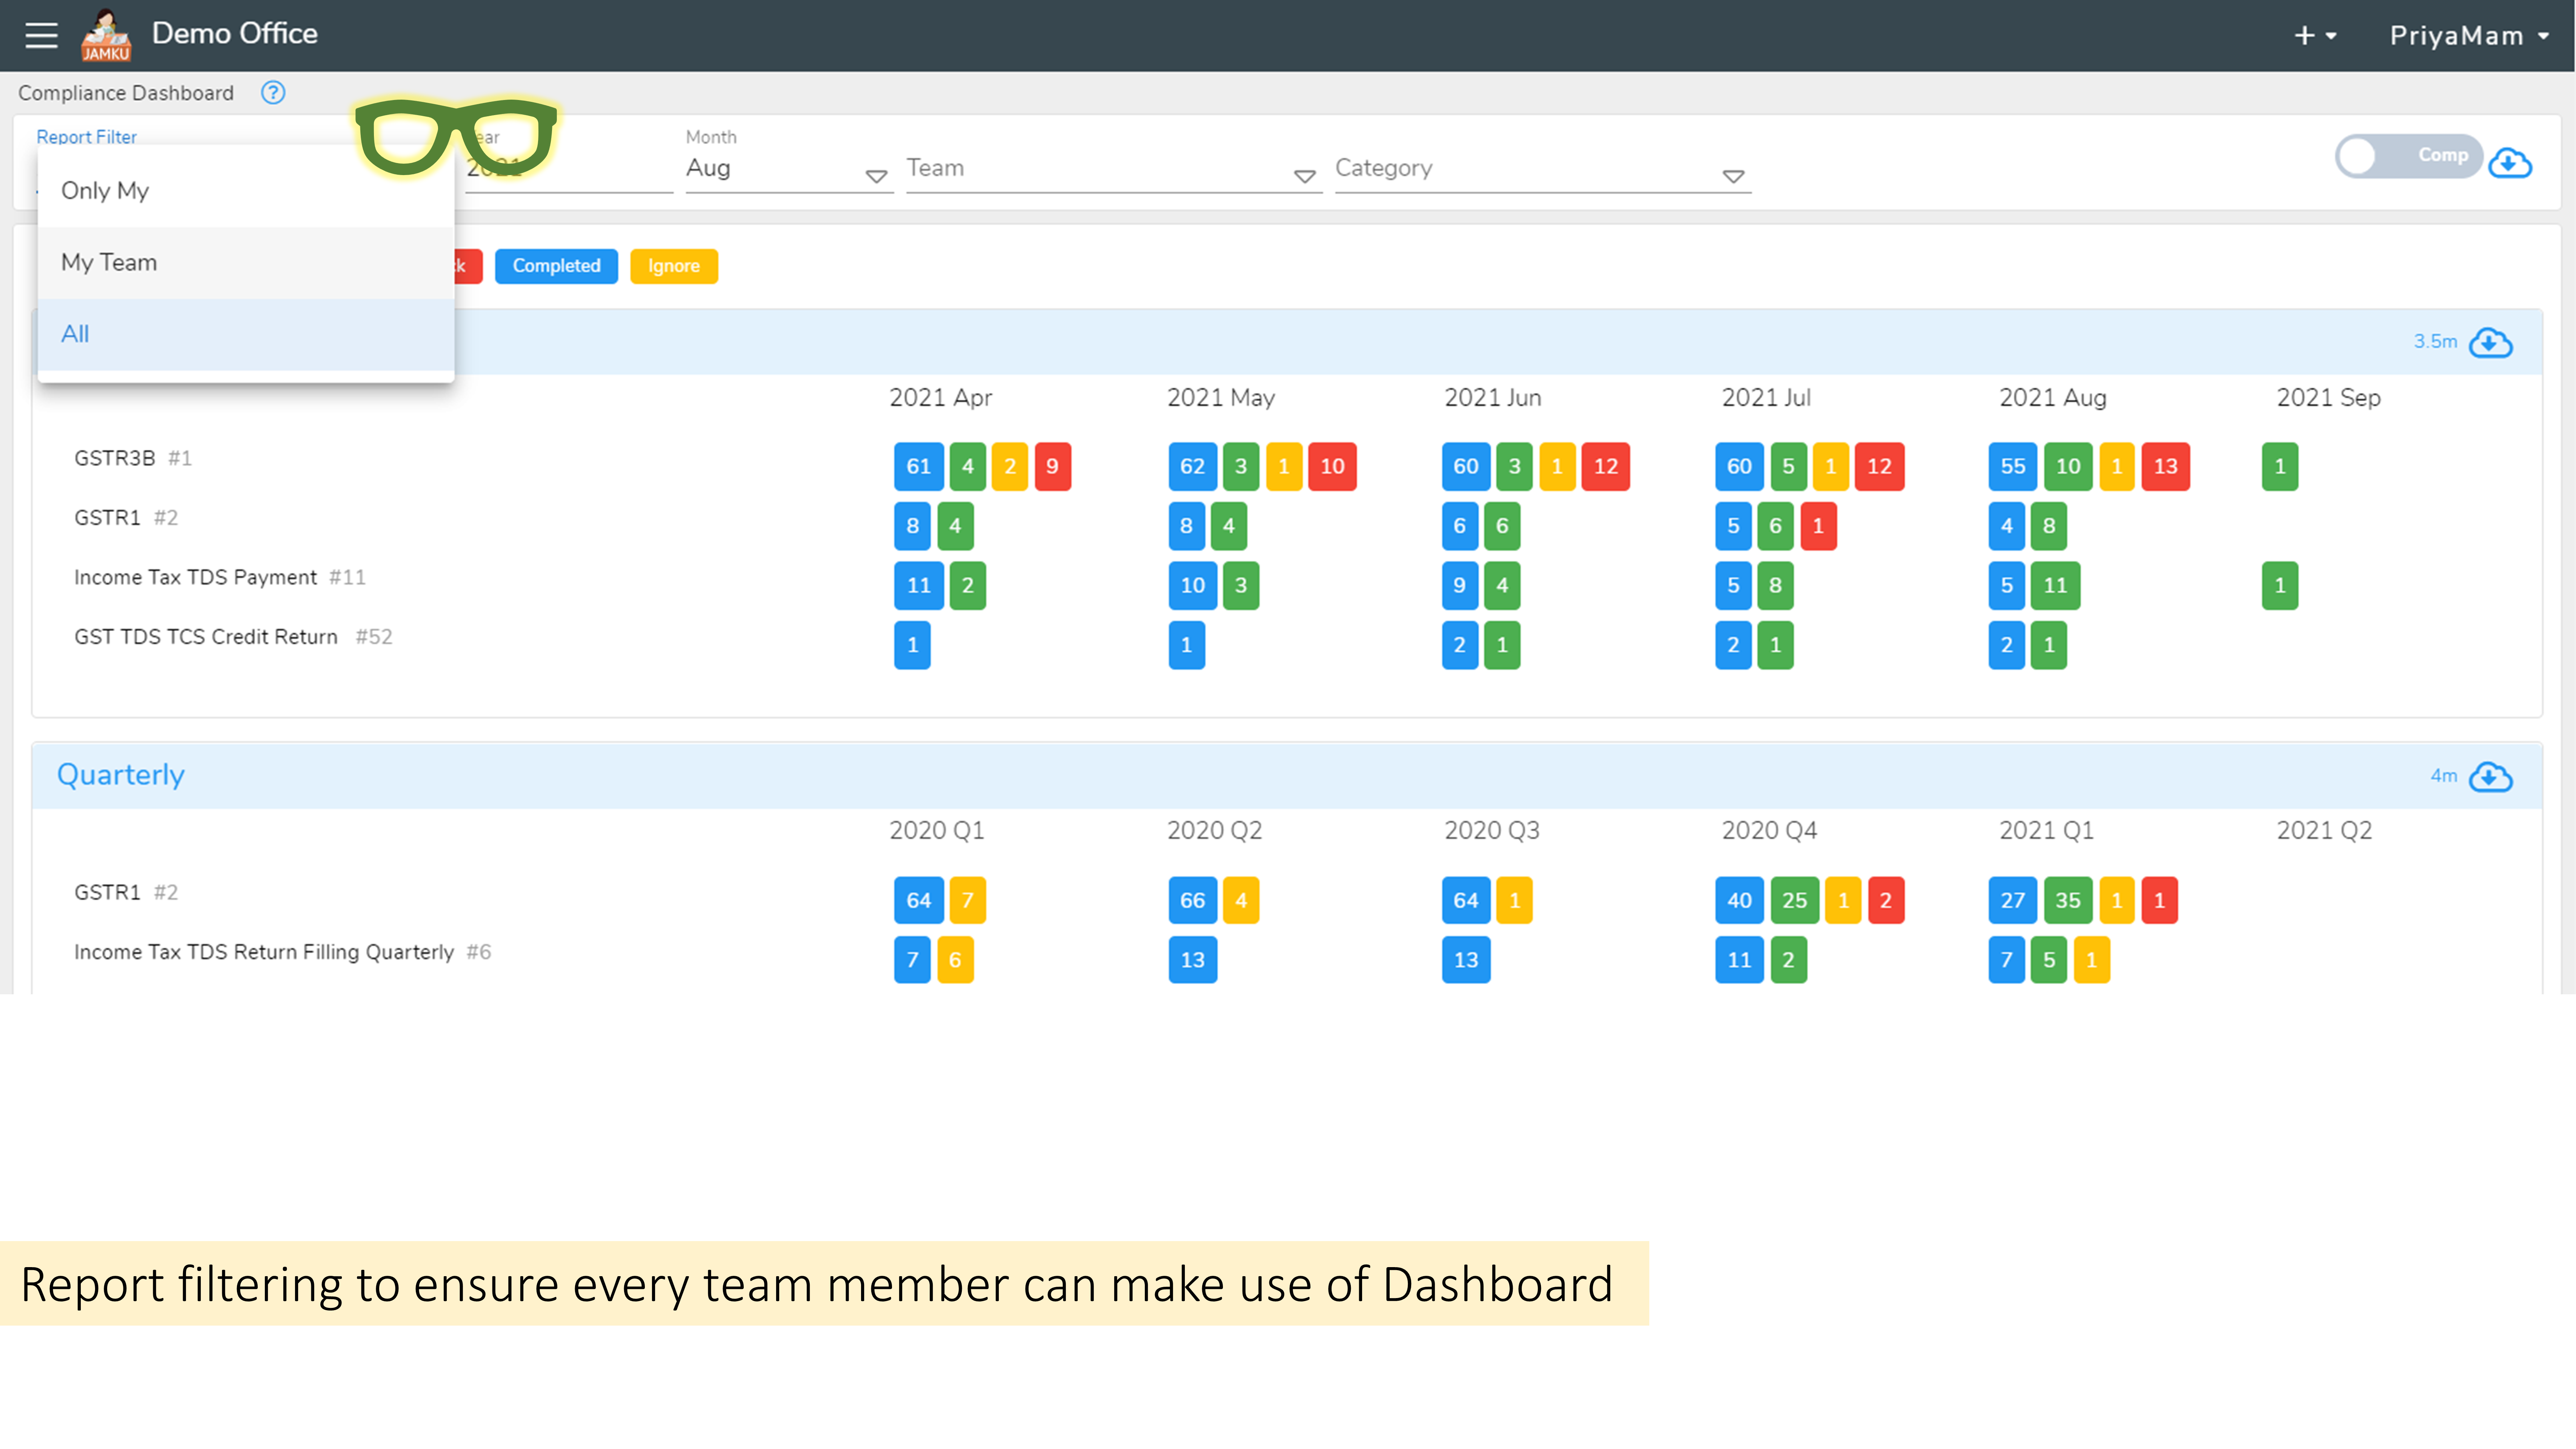 Compliance Dashboard for recurring tasks